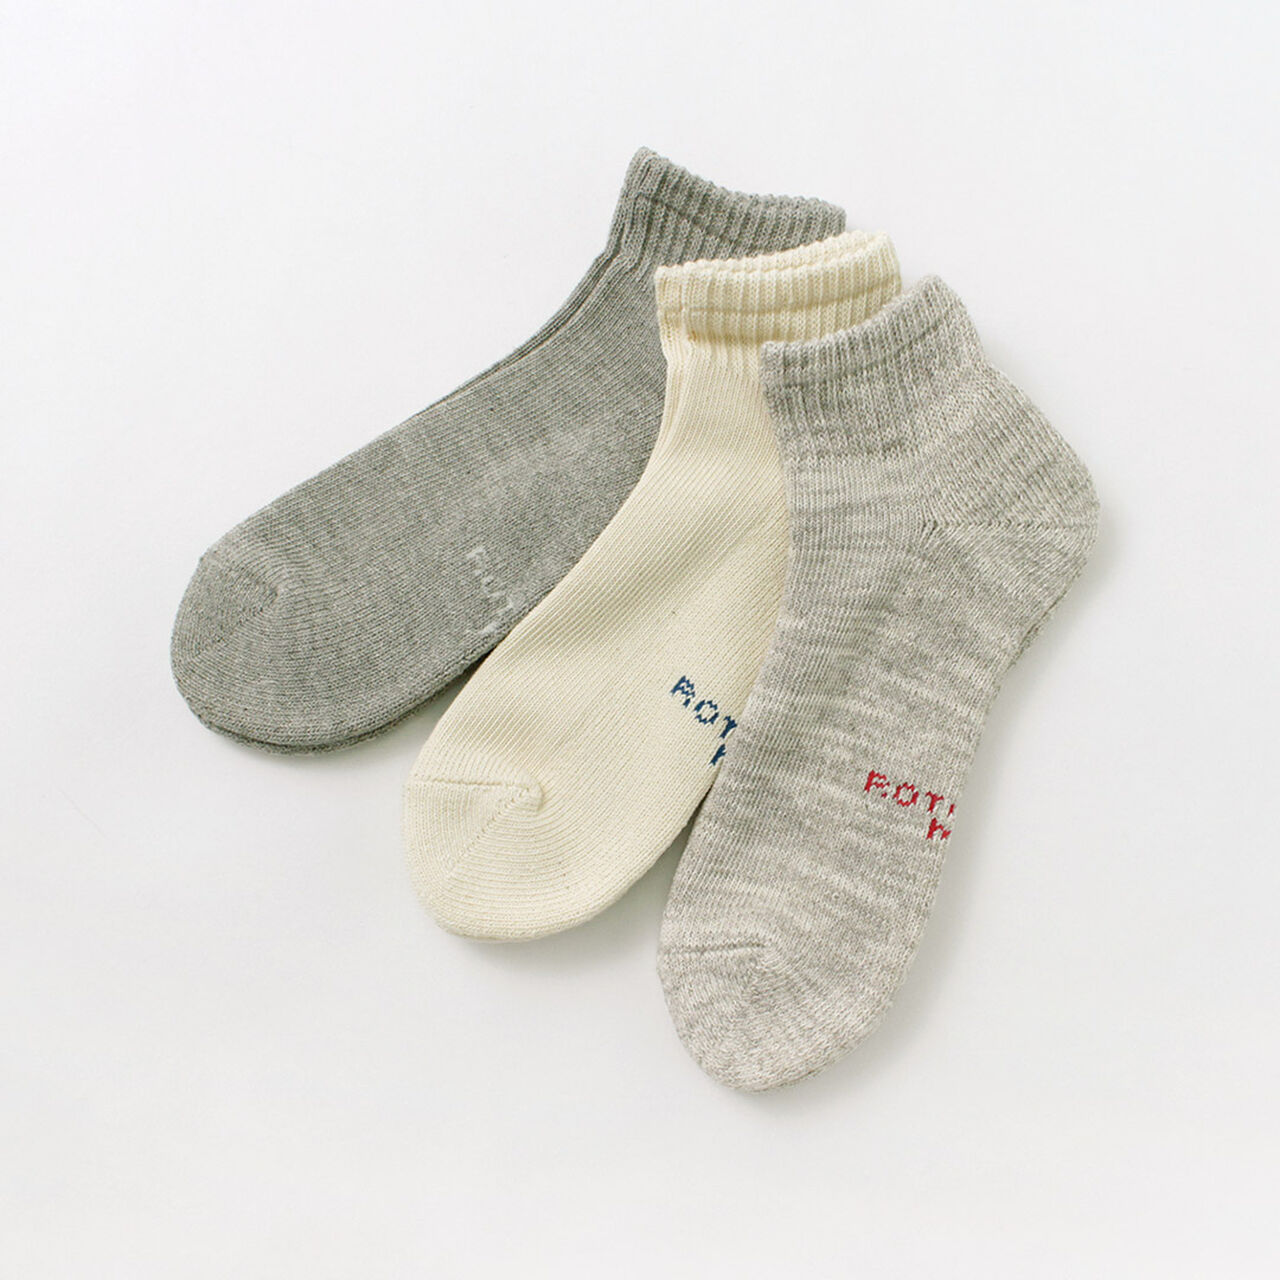 Organic daily 3 pack ankle socks,Ecru_Grey, large image number 0